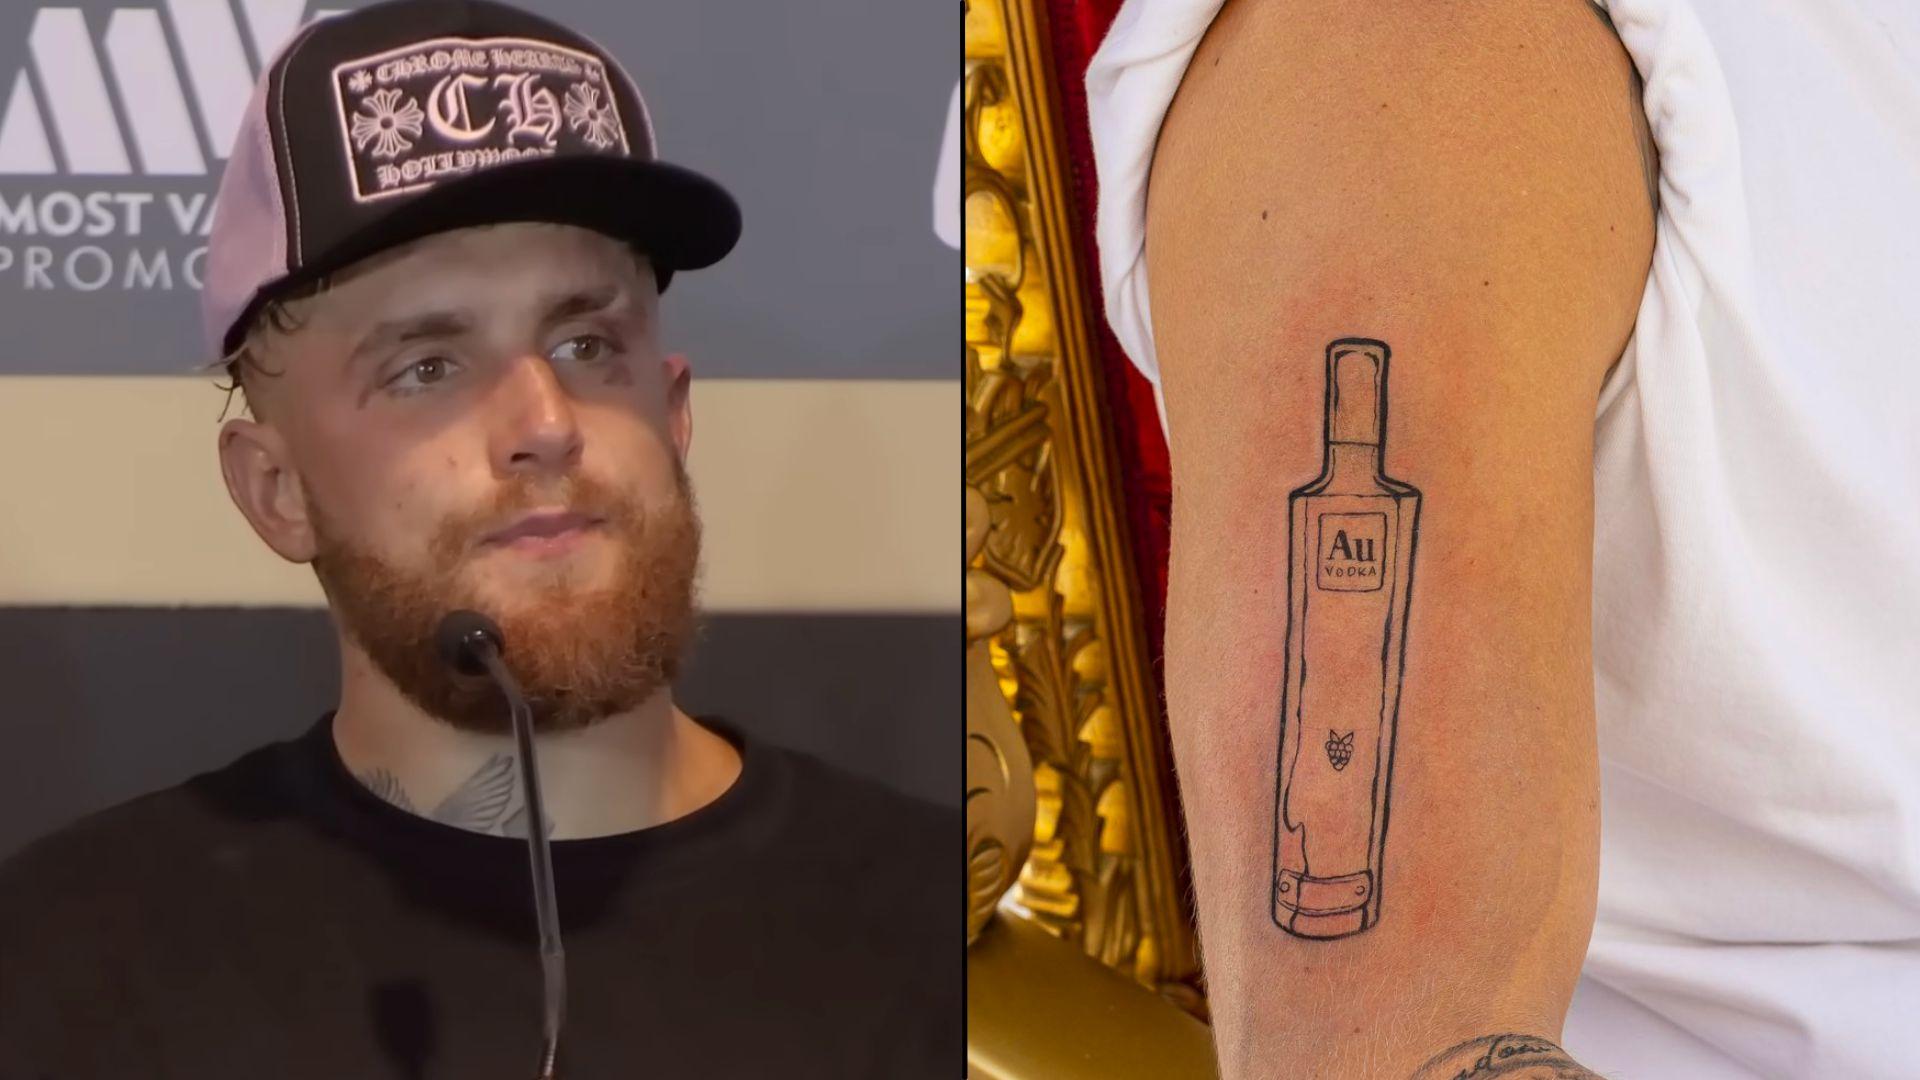 Jake Paul in hat sat next to tattoo on arm